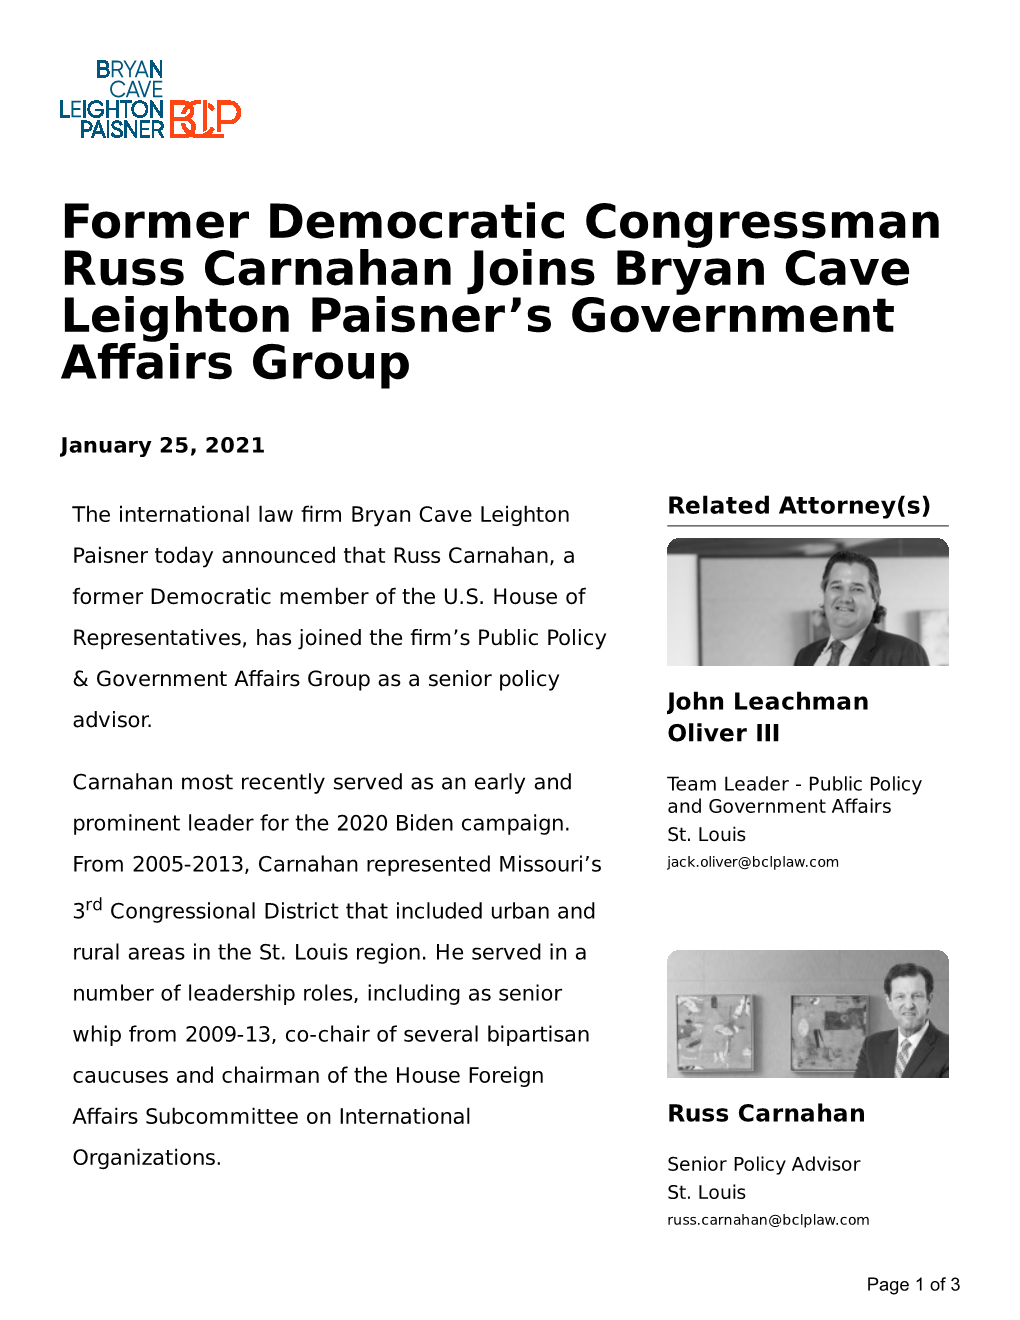 Former Democratic Congressman Russ Carnahan Joins Bryan Cave Leighton Paisner’S Government Aﬀairs Group